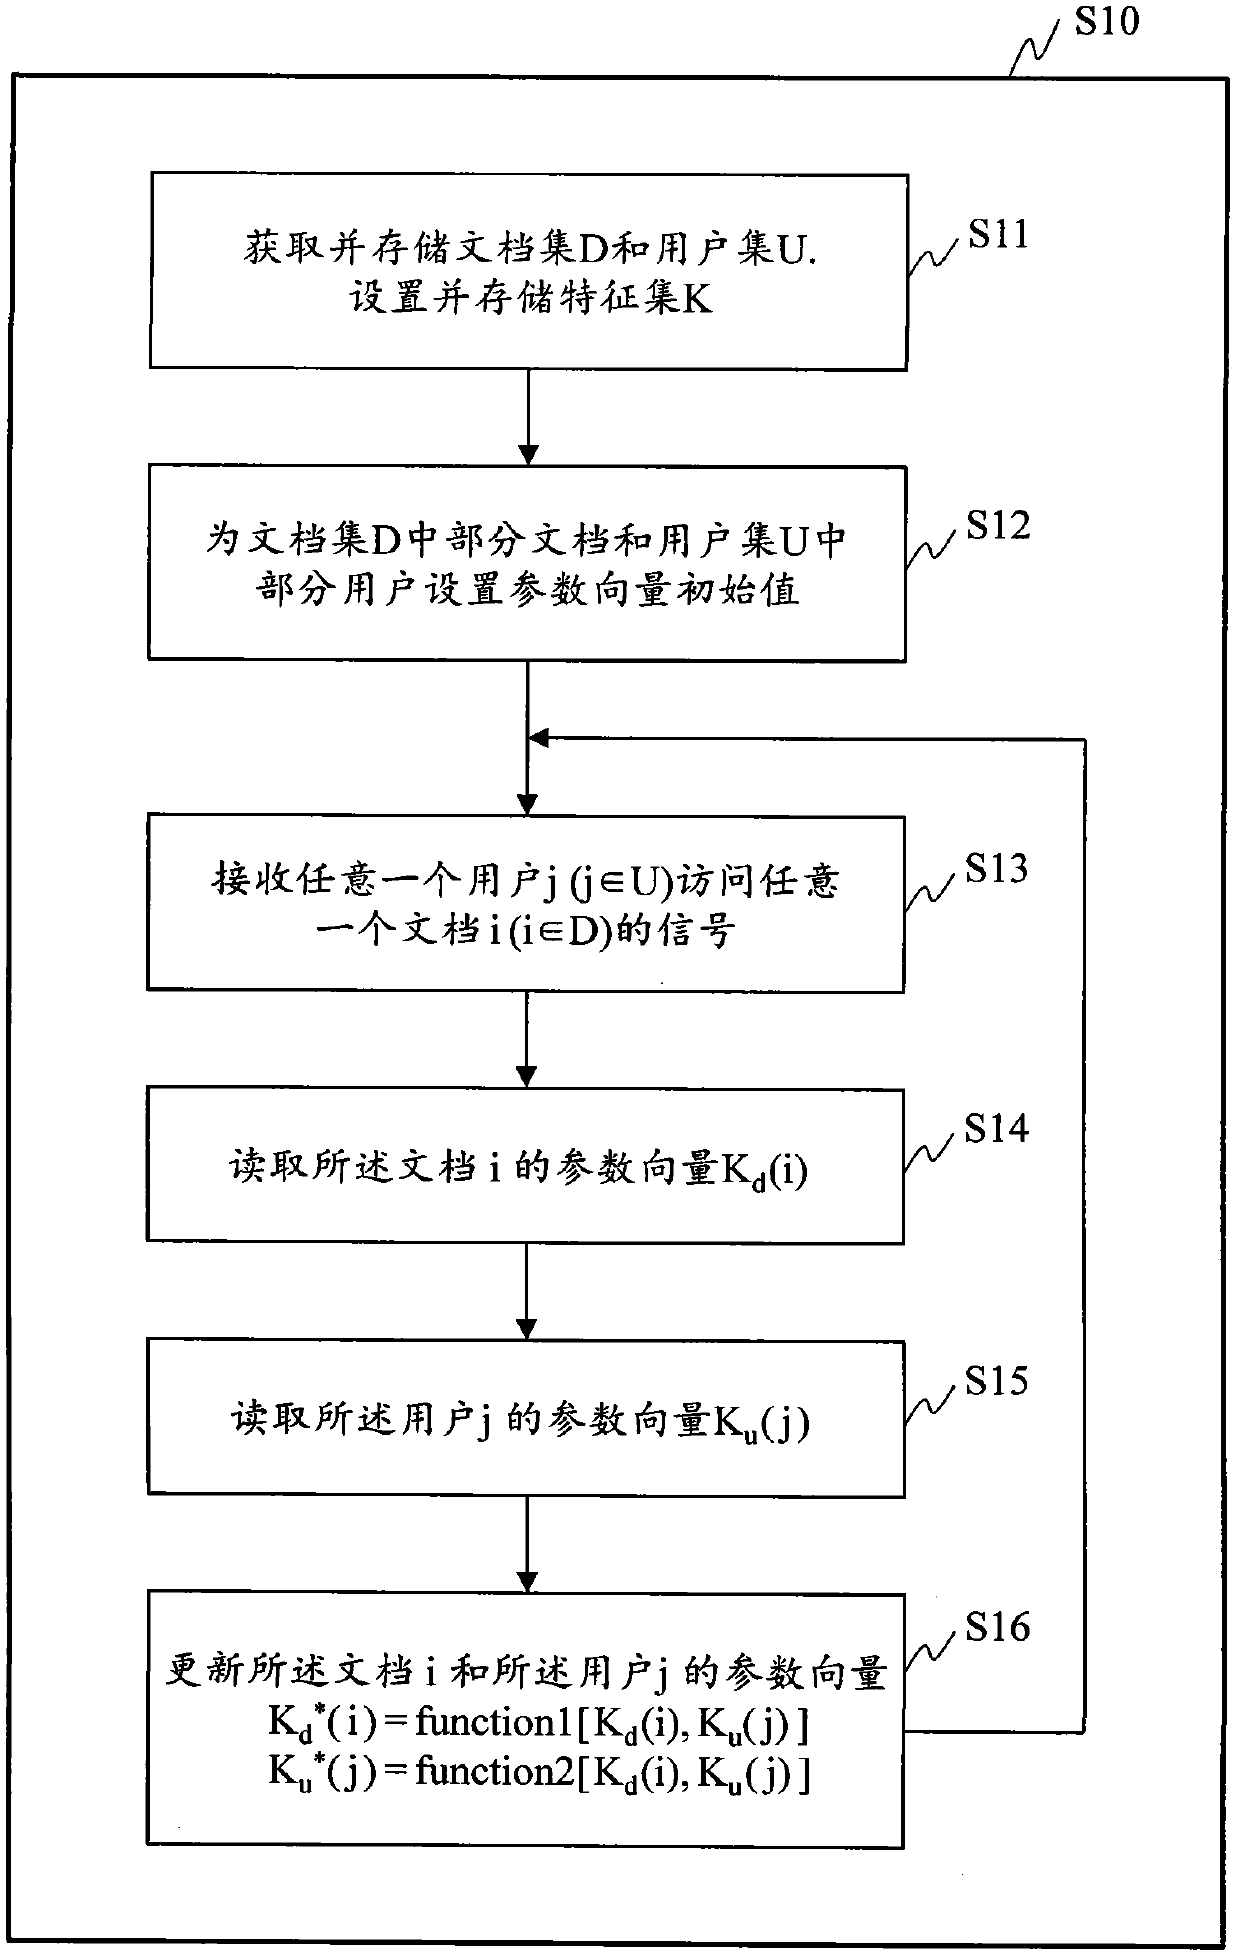 Method and system for acquiring individuation characteristics of users and documents